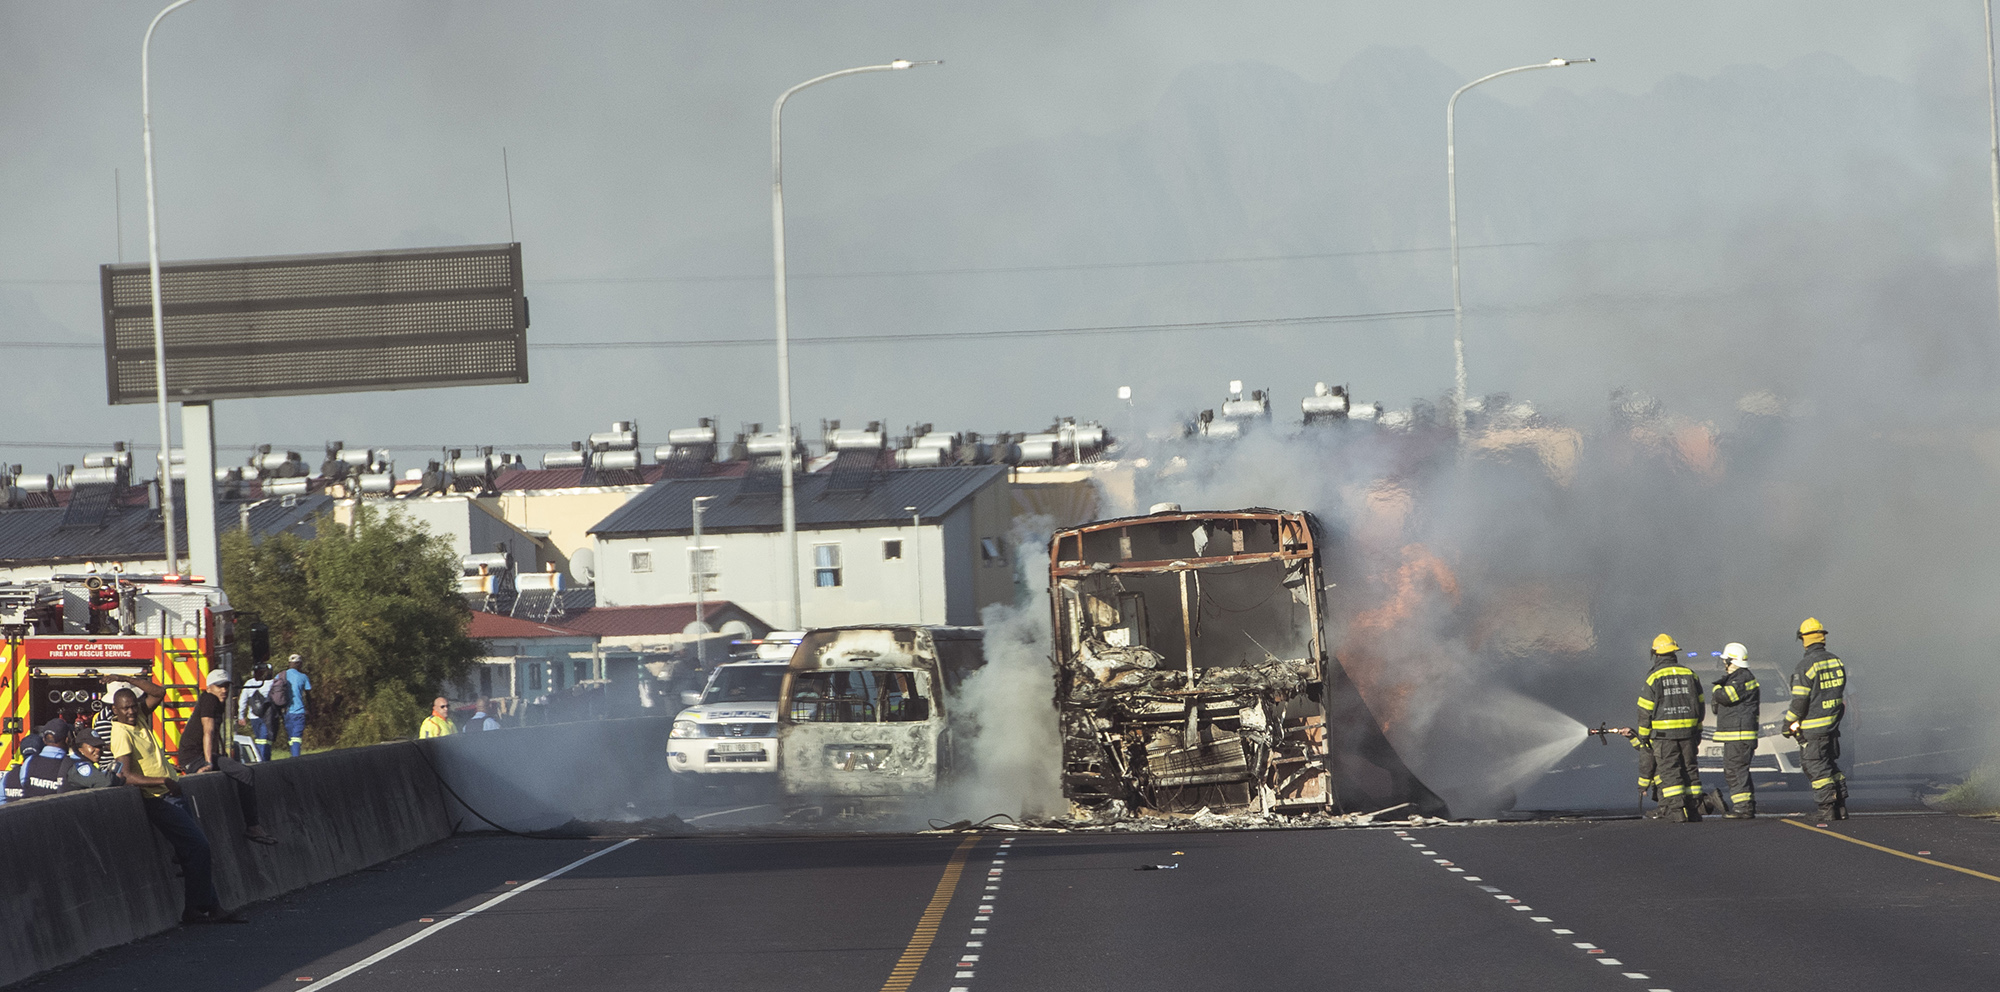 Fireman douse a burning bus during the Cape Town taxi strike